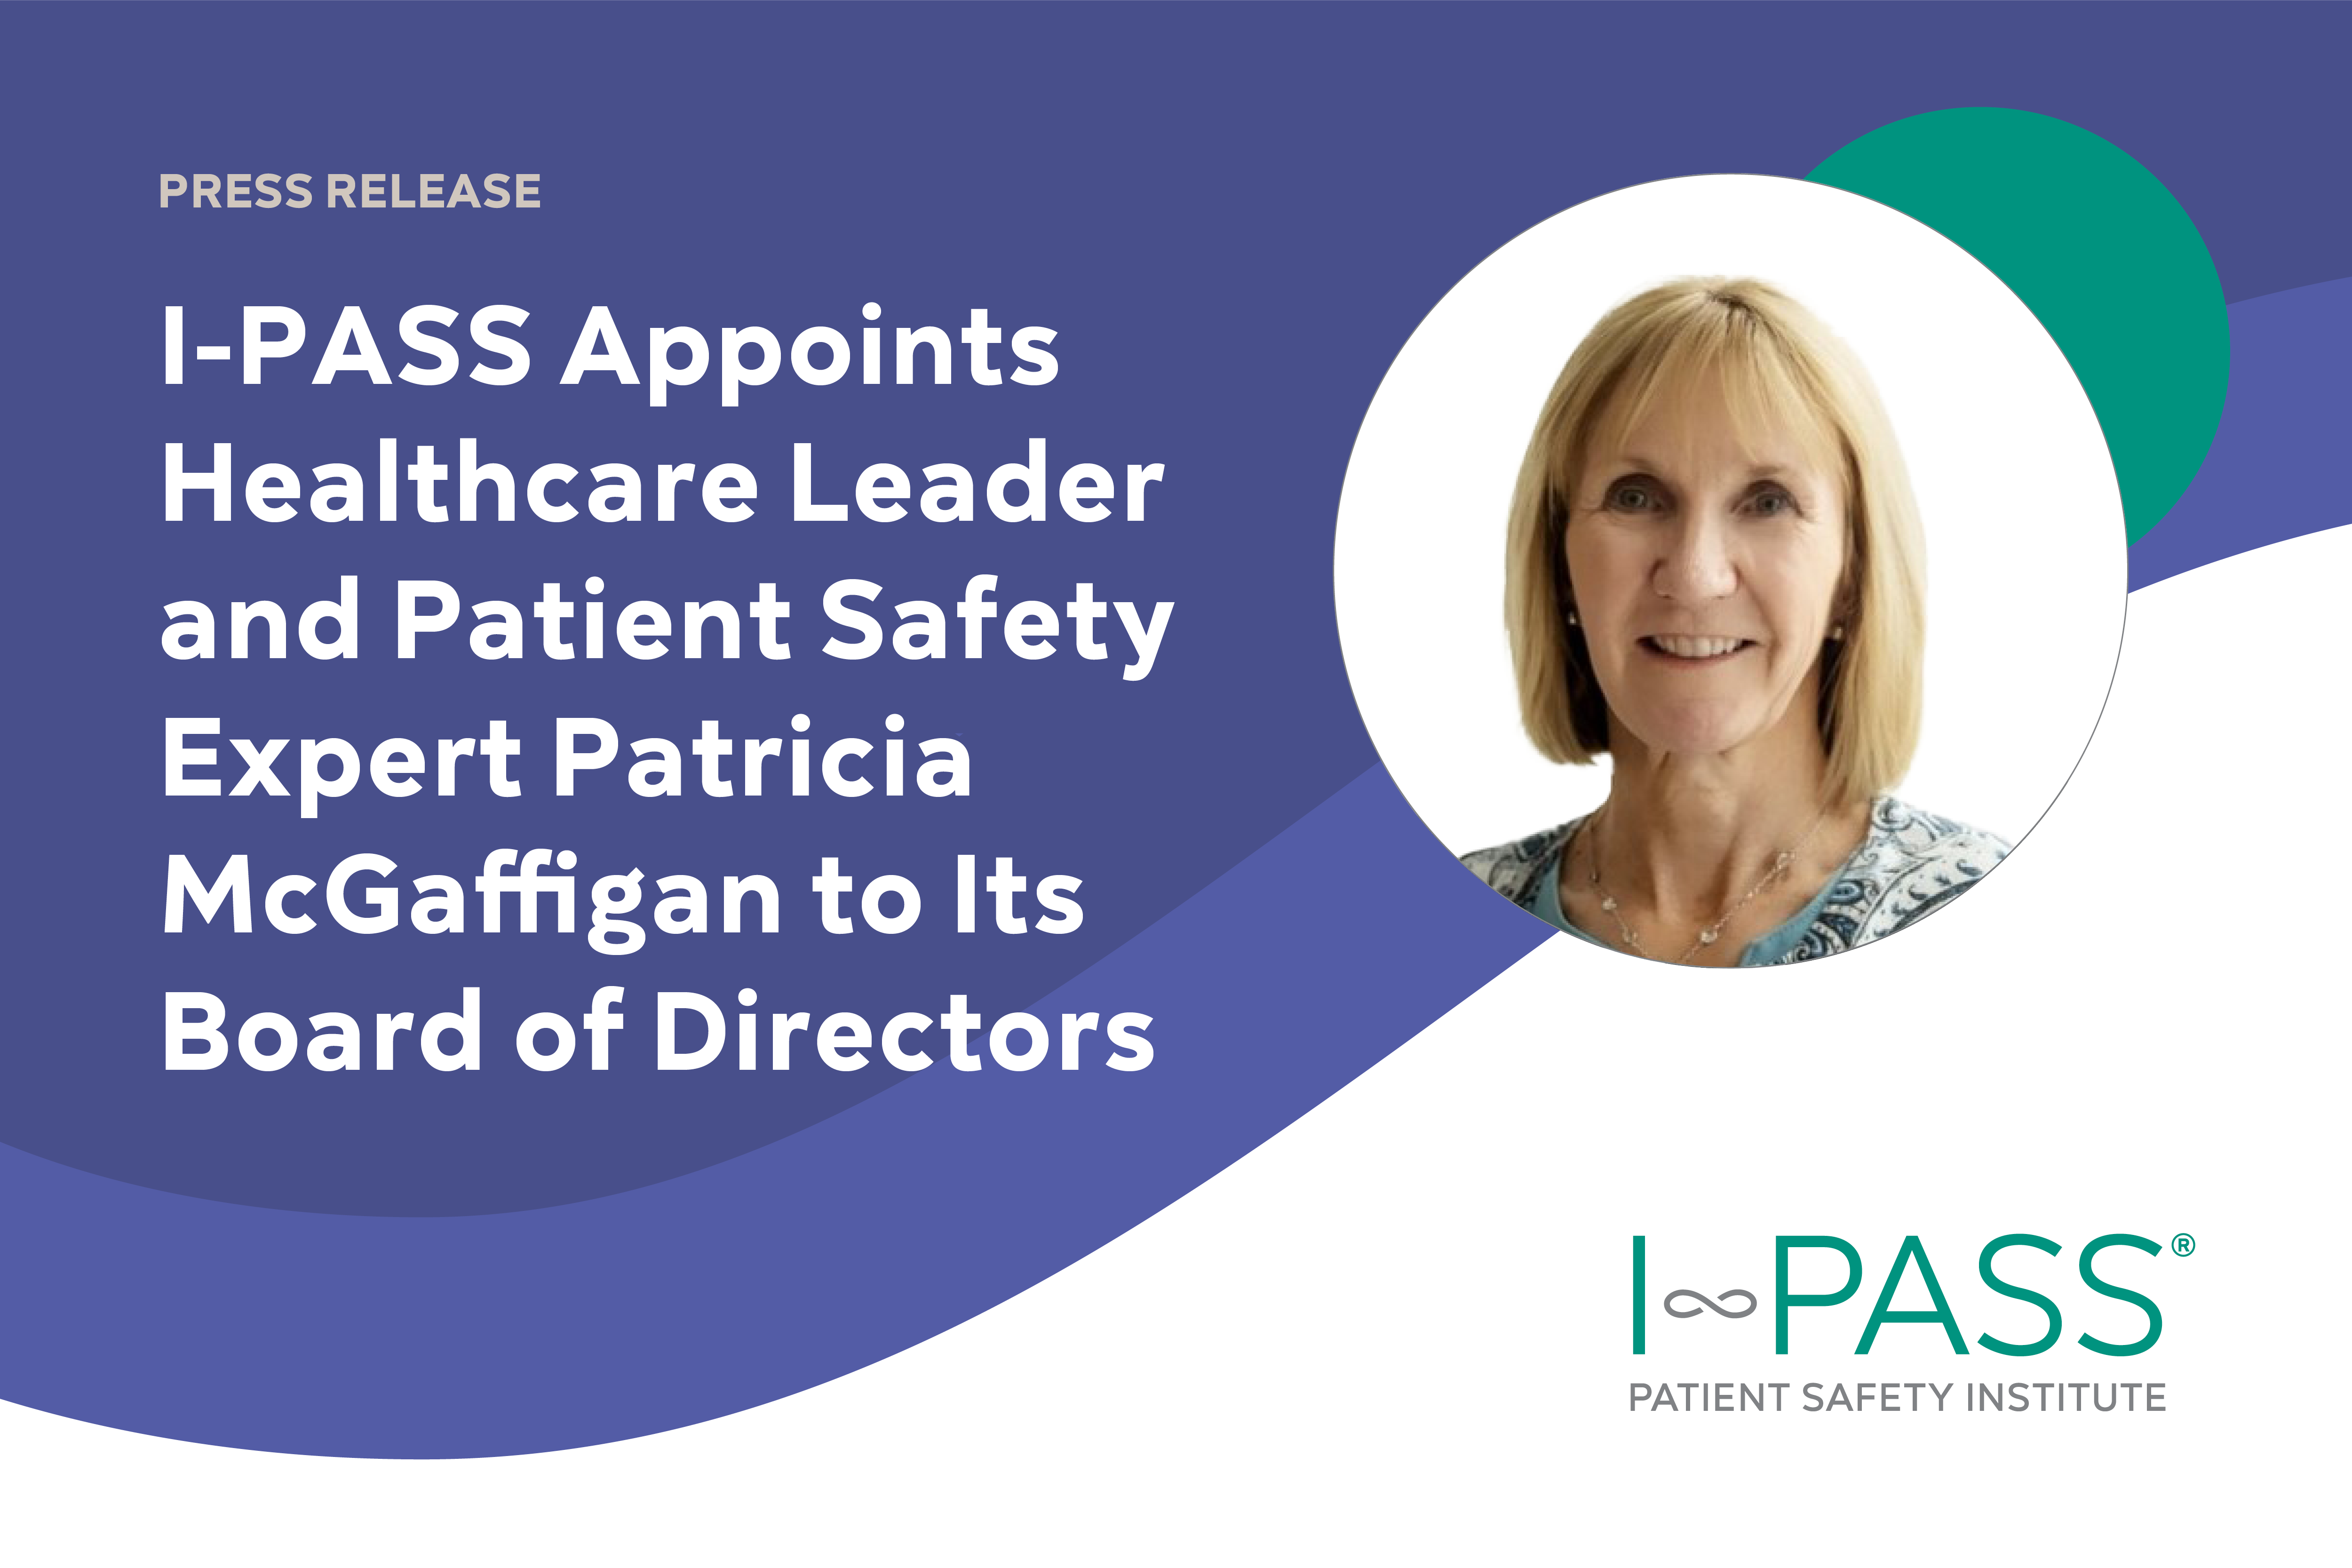 I-PASS Appoints Healthcare Leader and Patient Safety Expert Patricia McGaffigan to Its Board of Directors